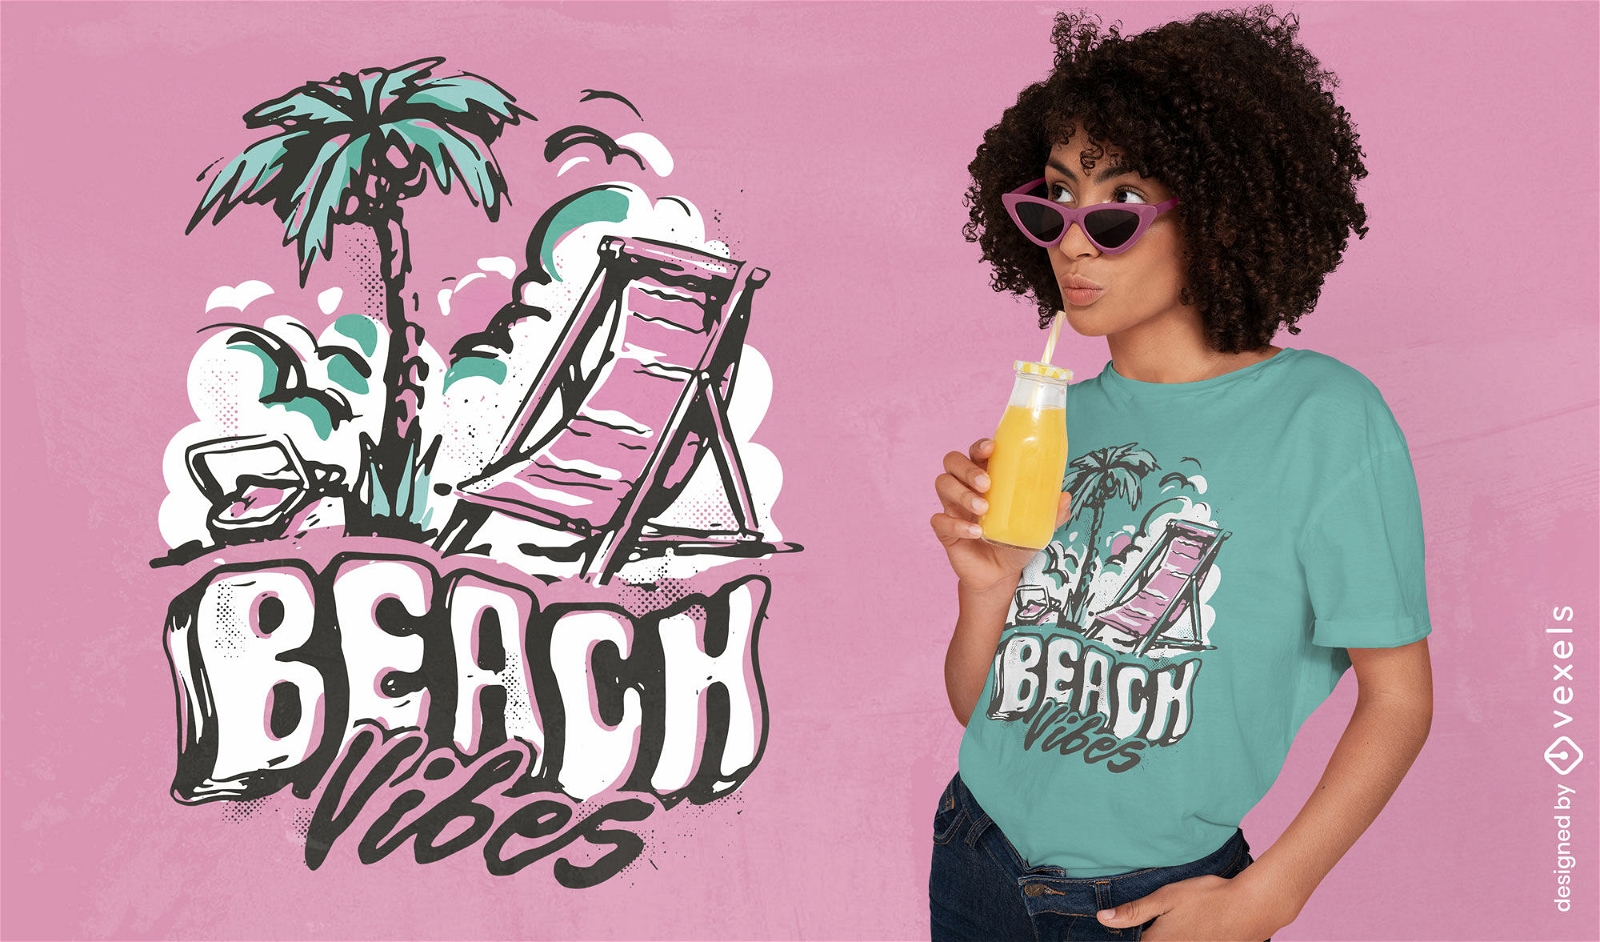 Beach vibes quote t-shirt design